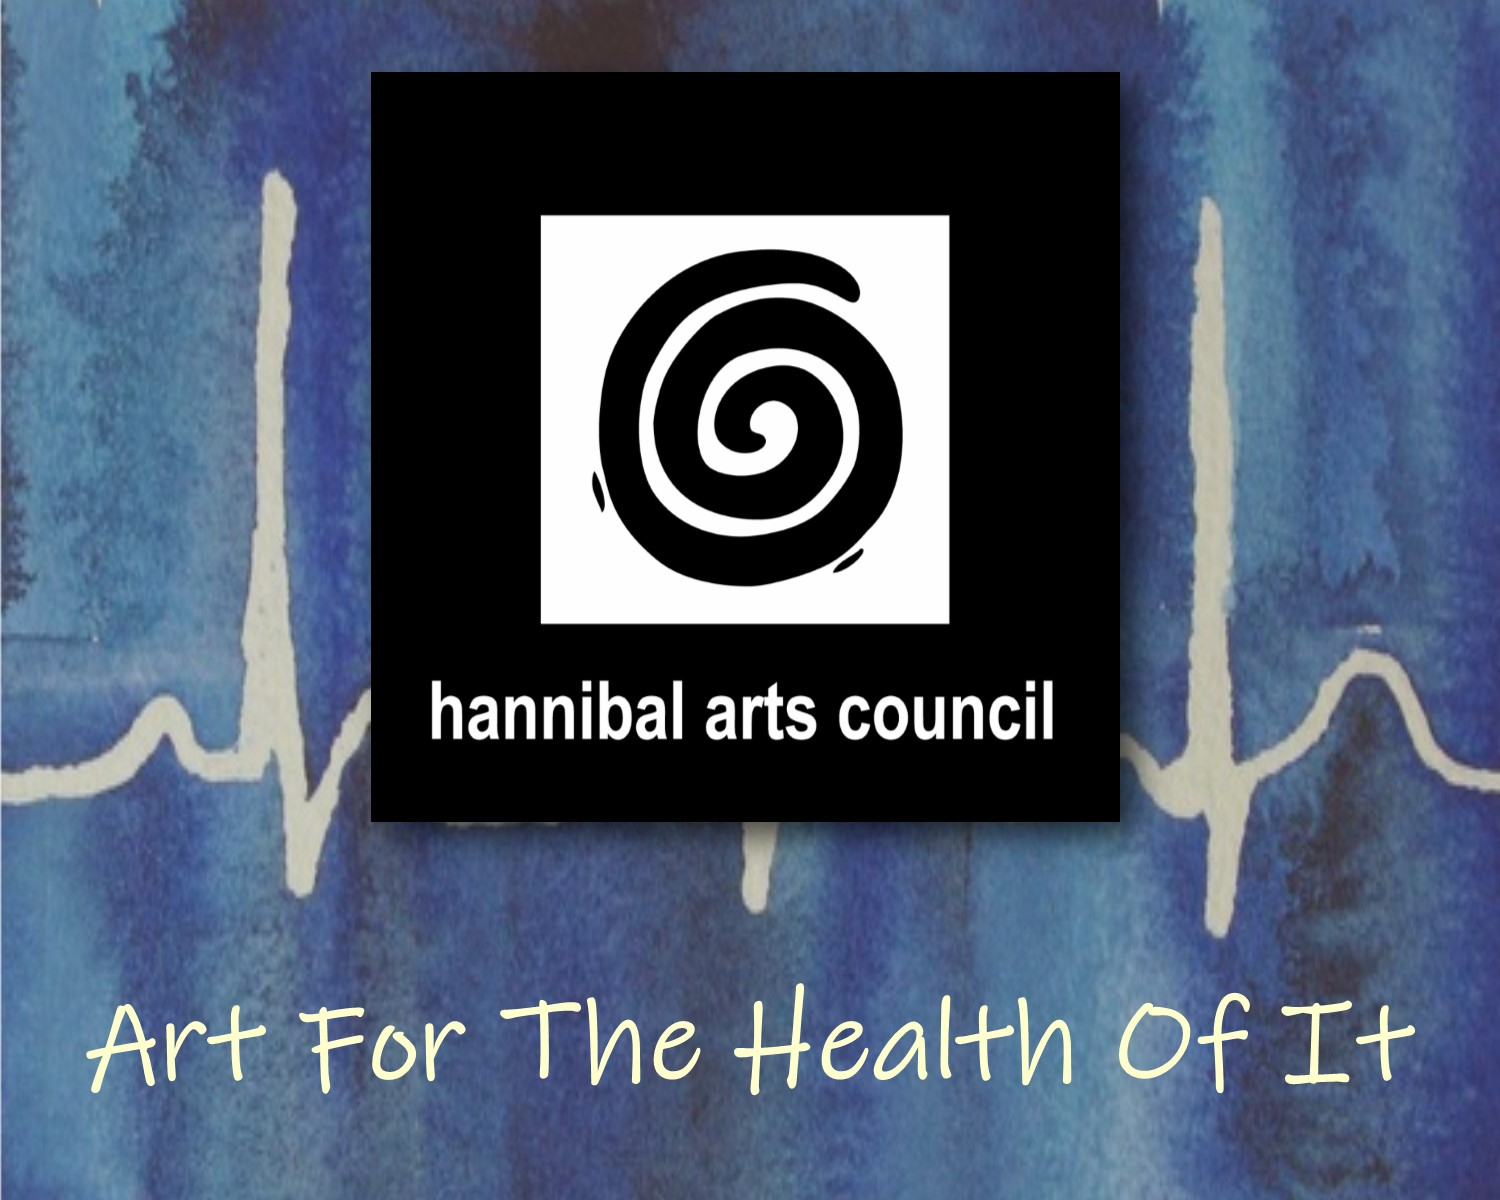 Hannibal Arts Council Art for the Health of It